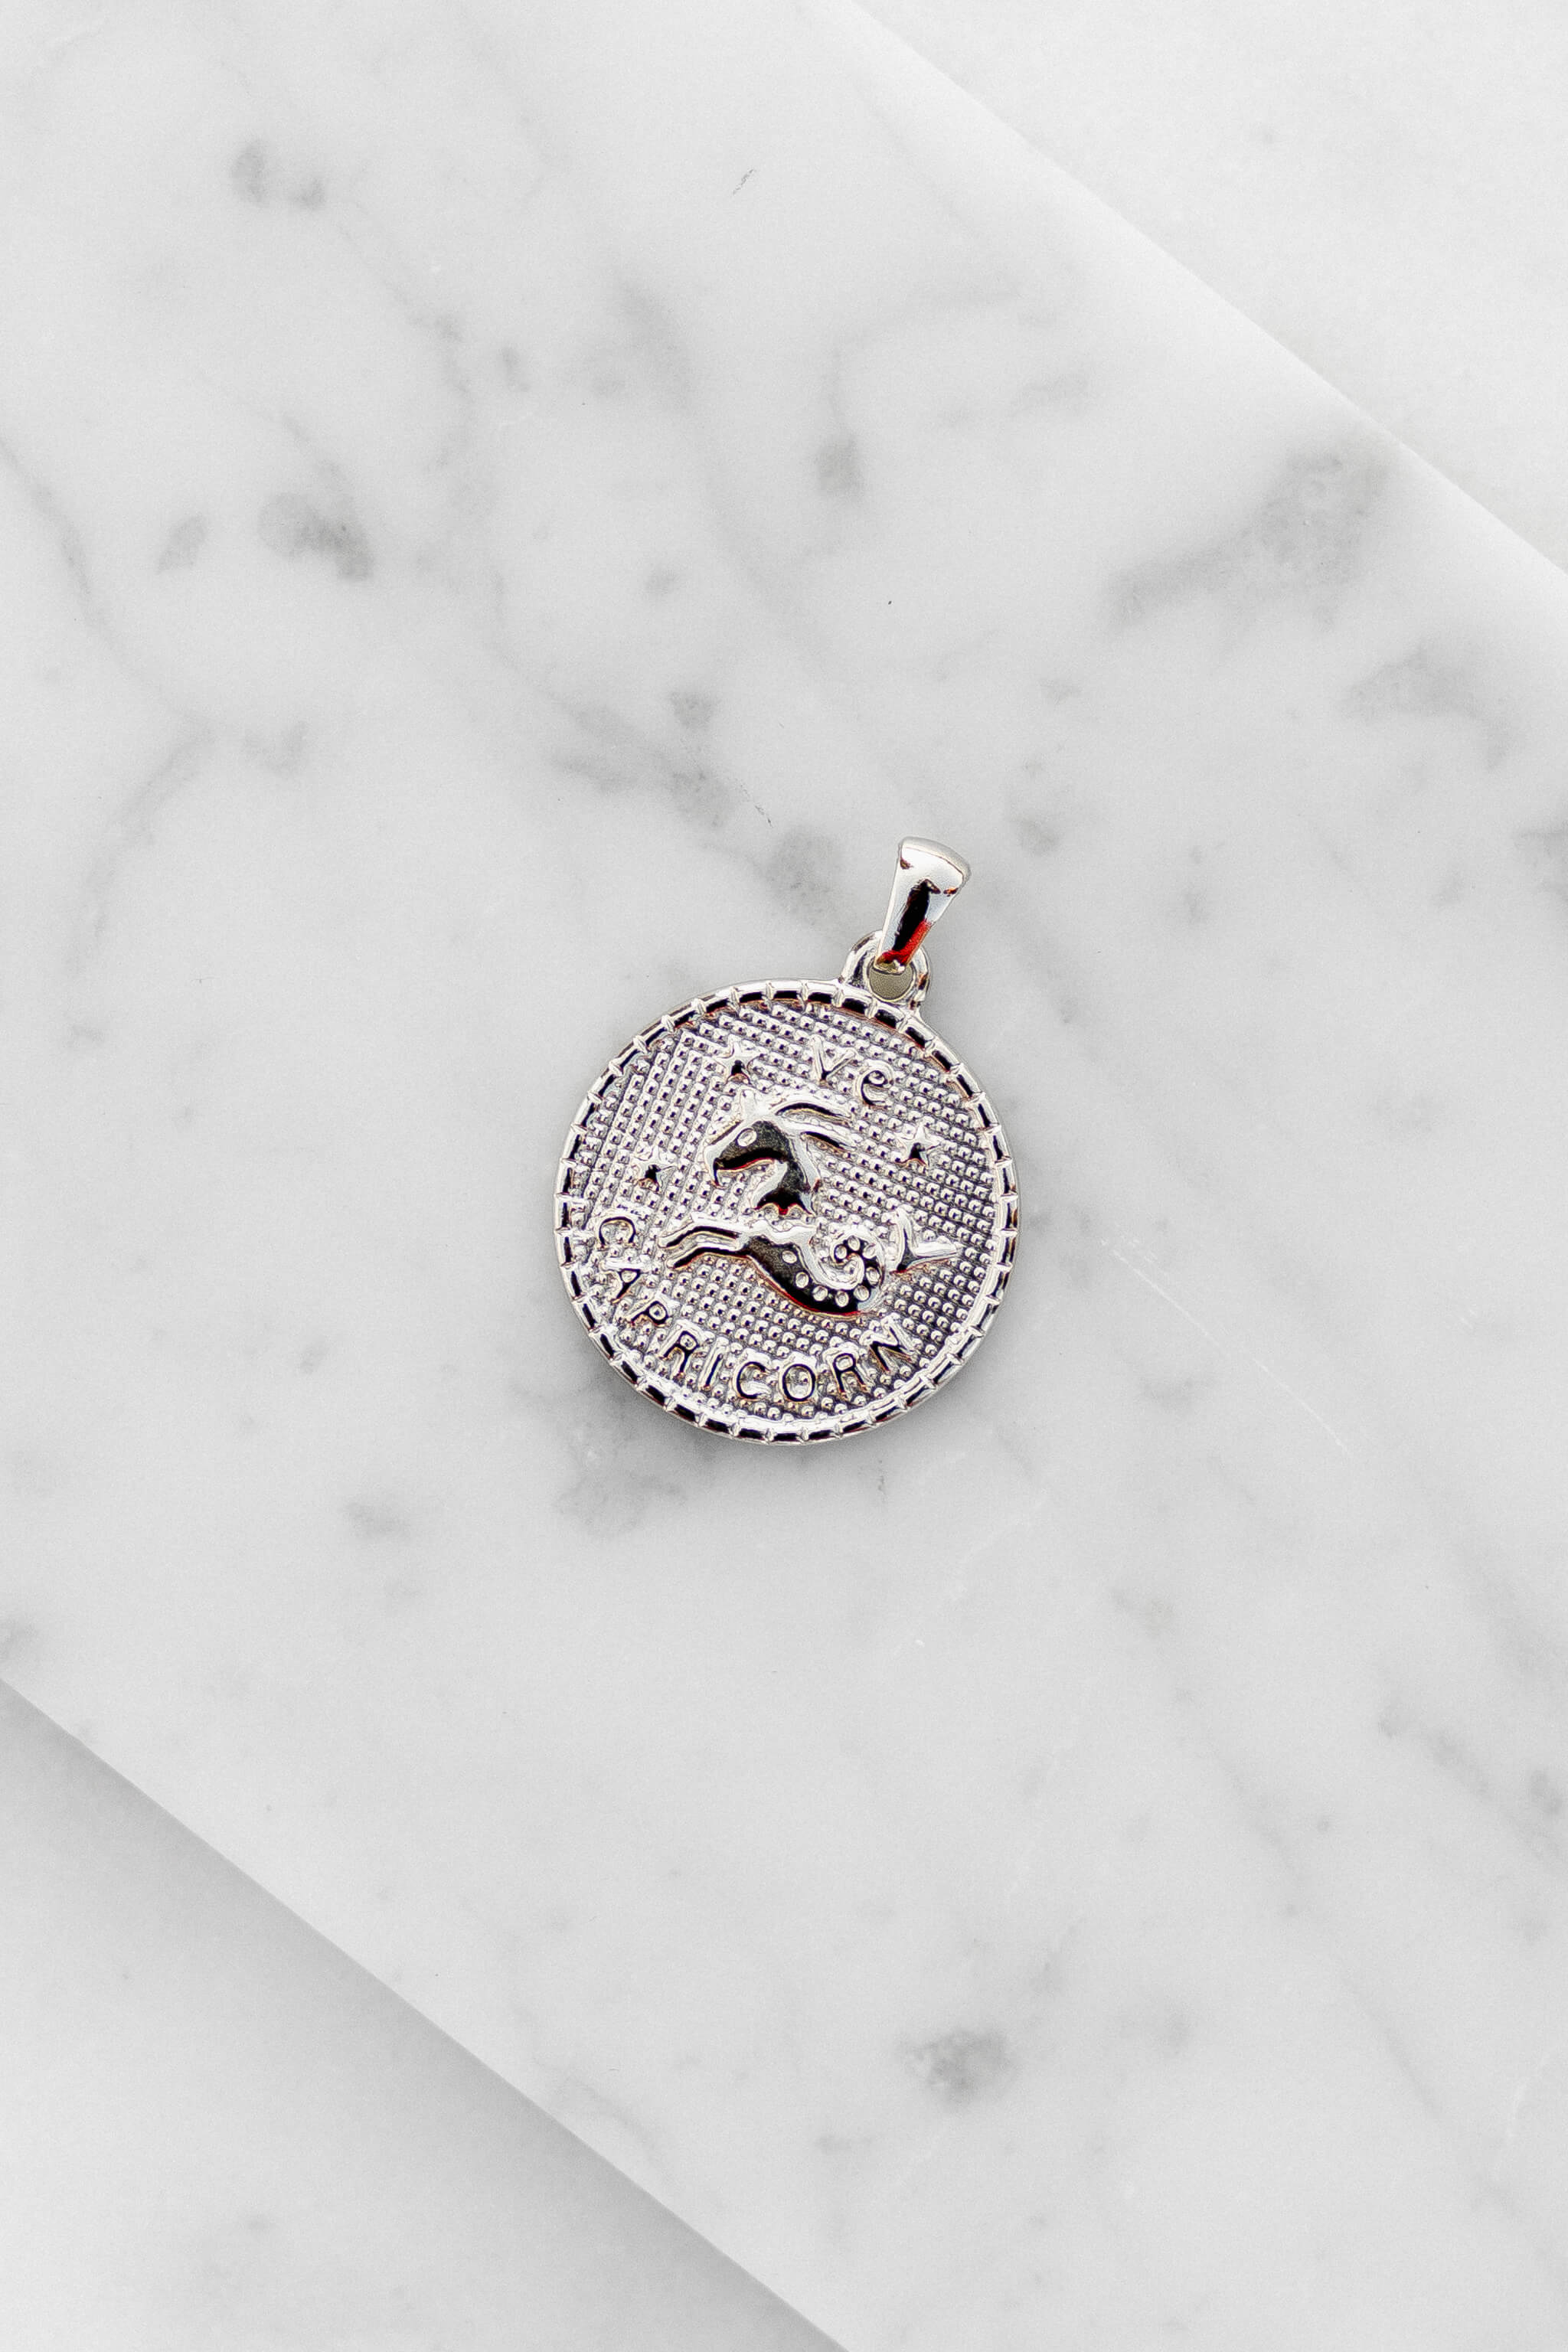 Capricorn zodiac sign silver coin charm laying on a white marble